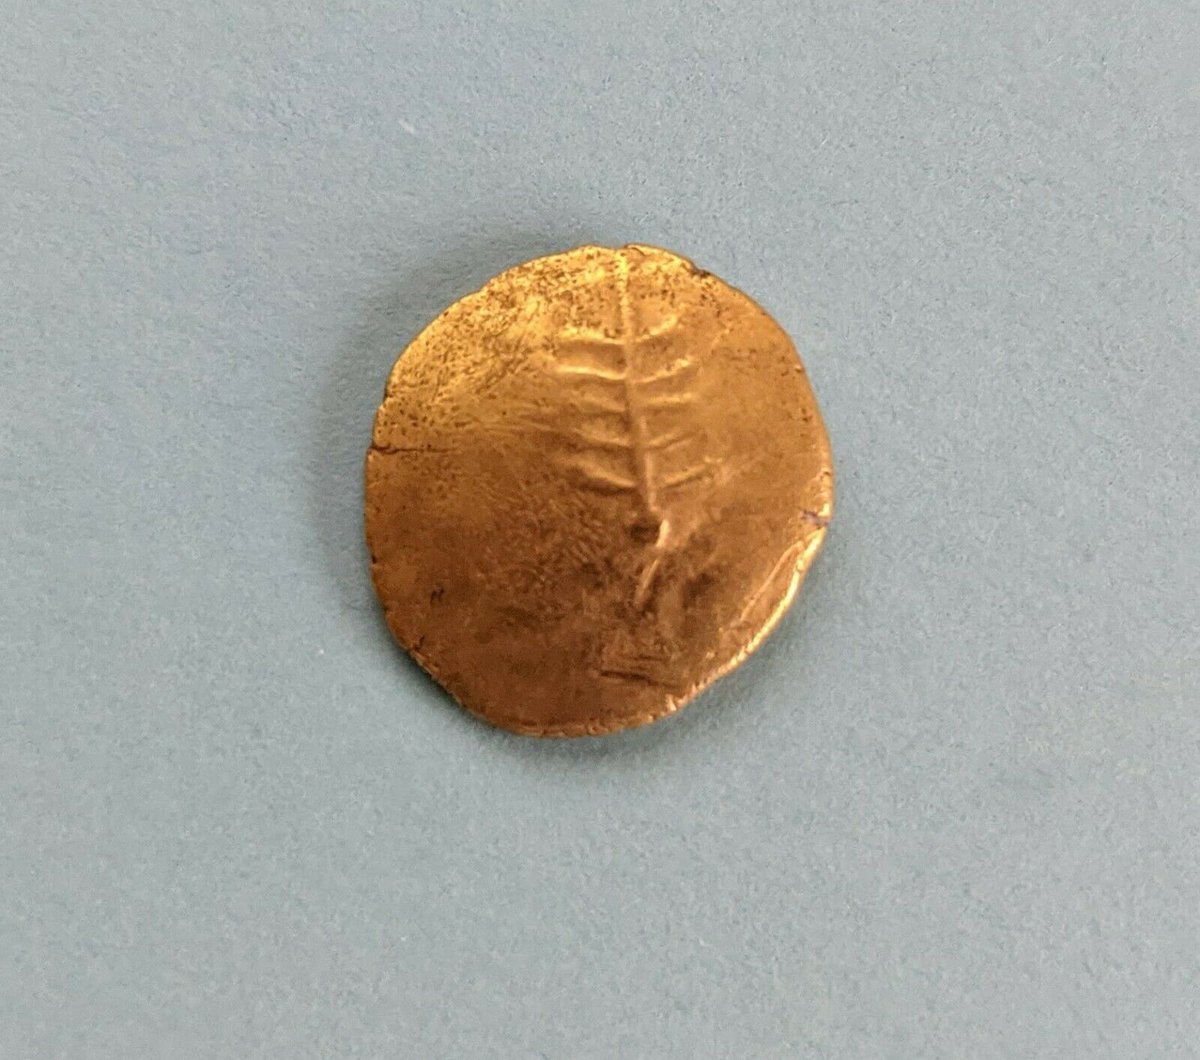 Dobunni Anted Gold Stater - Three Tailed Horse - Tree - Celtic Coin 20-43AD

£1,950 or near offer

#dobunni #GOLD #coin #collector #anted #goldcoin #ironage #Celtic #celticcoin #dobunnitree #collectible #collectable 

ebay.co.uk/itm/1542384892…